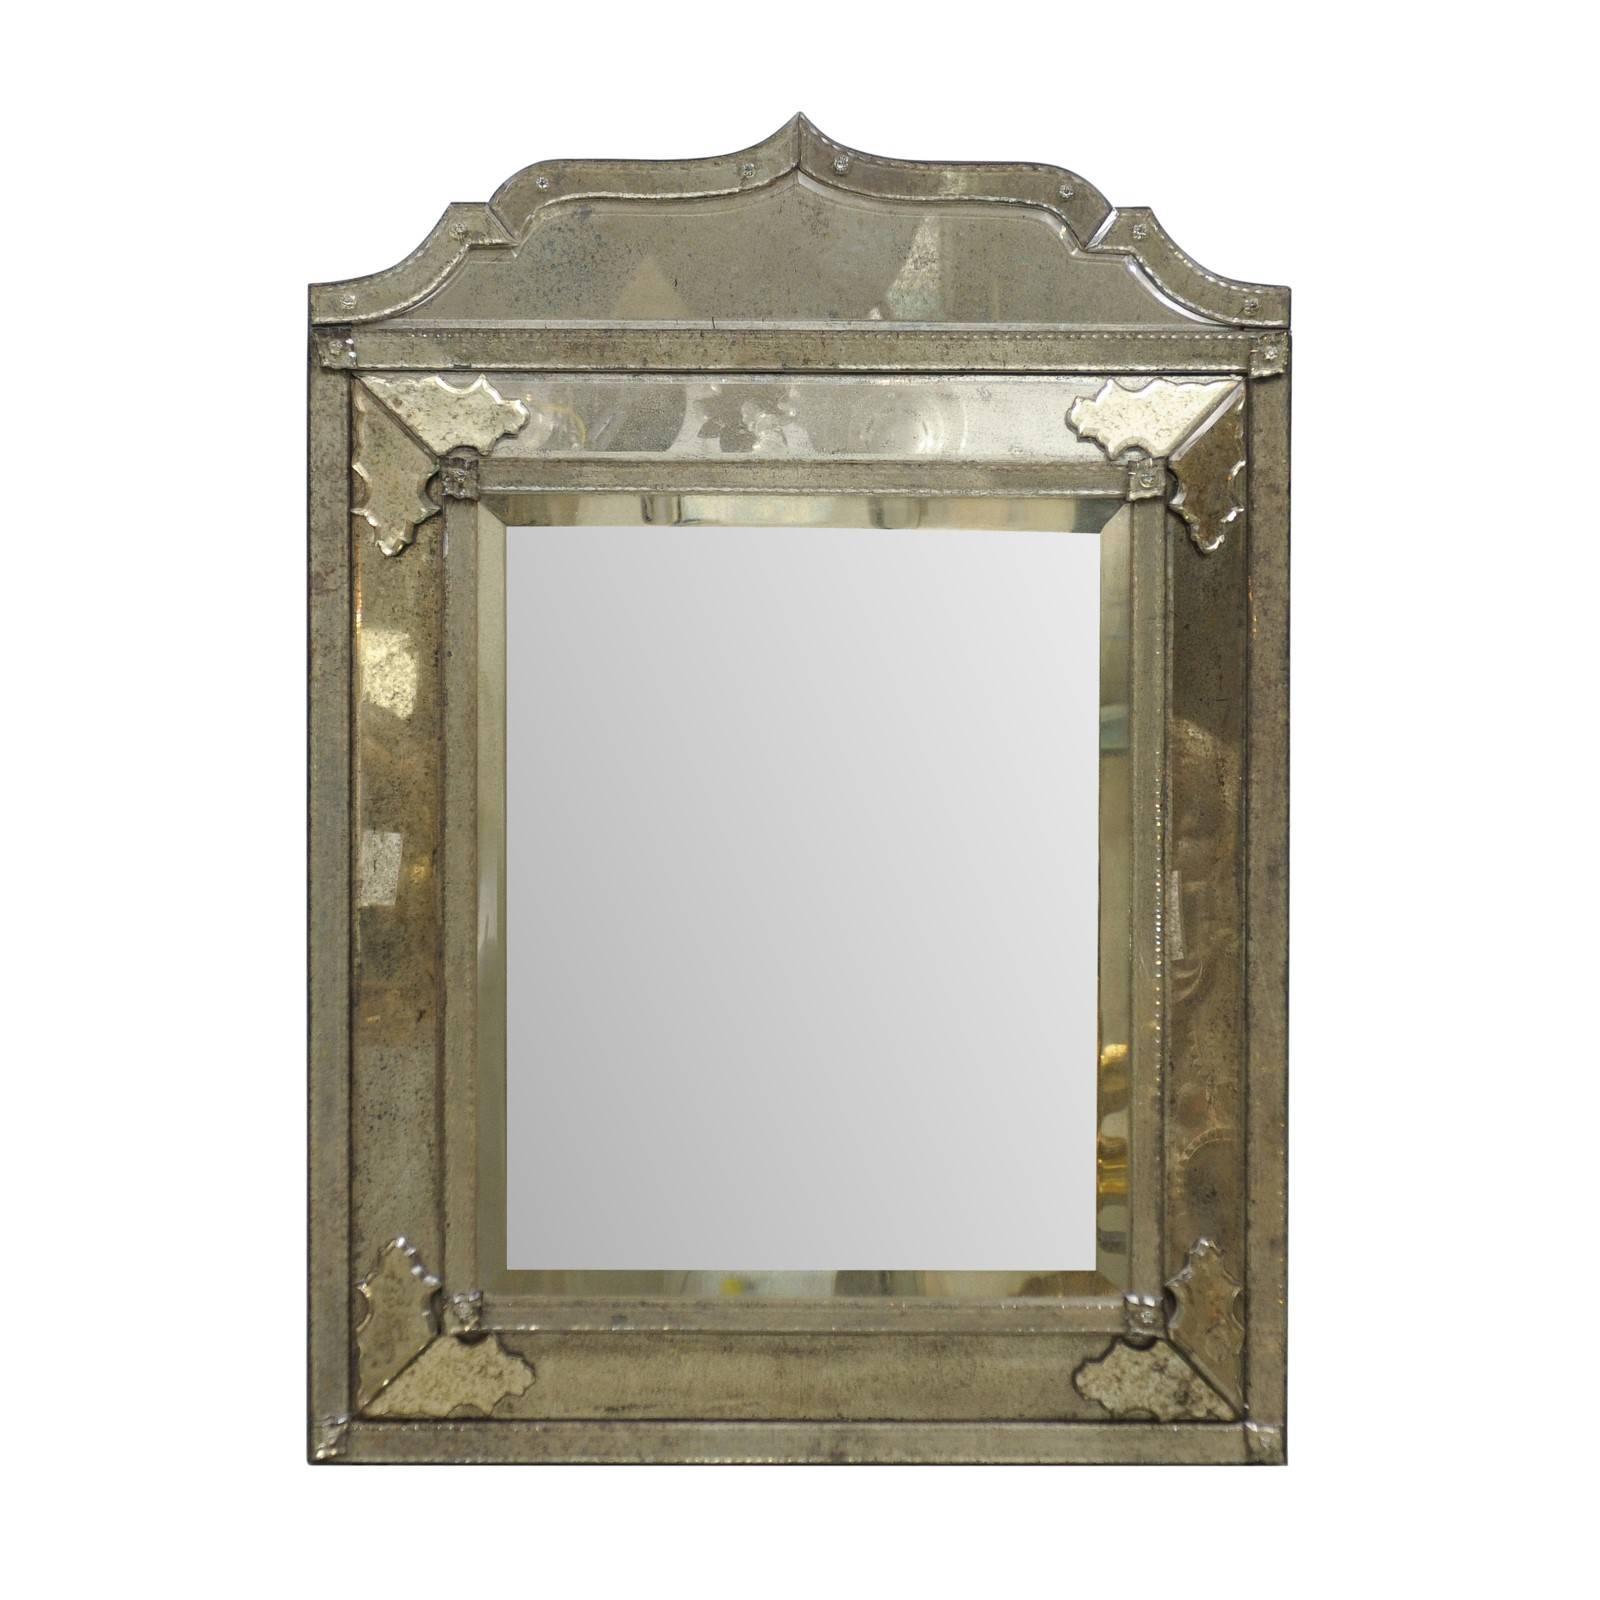 A Beautiful "Milano" Venetian-Style, Hand-Silvered Mirror w/Raised Central Panel